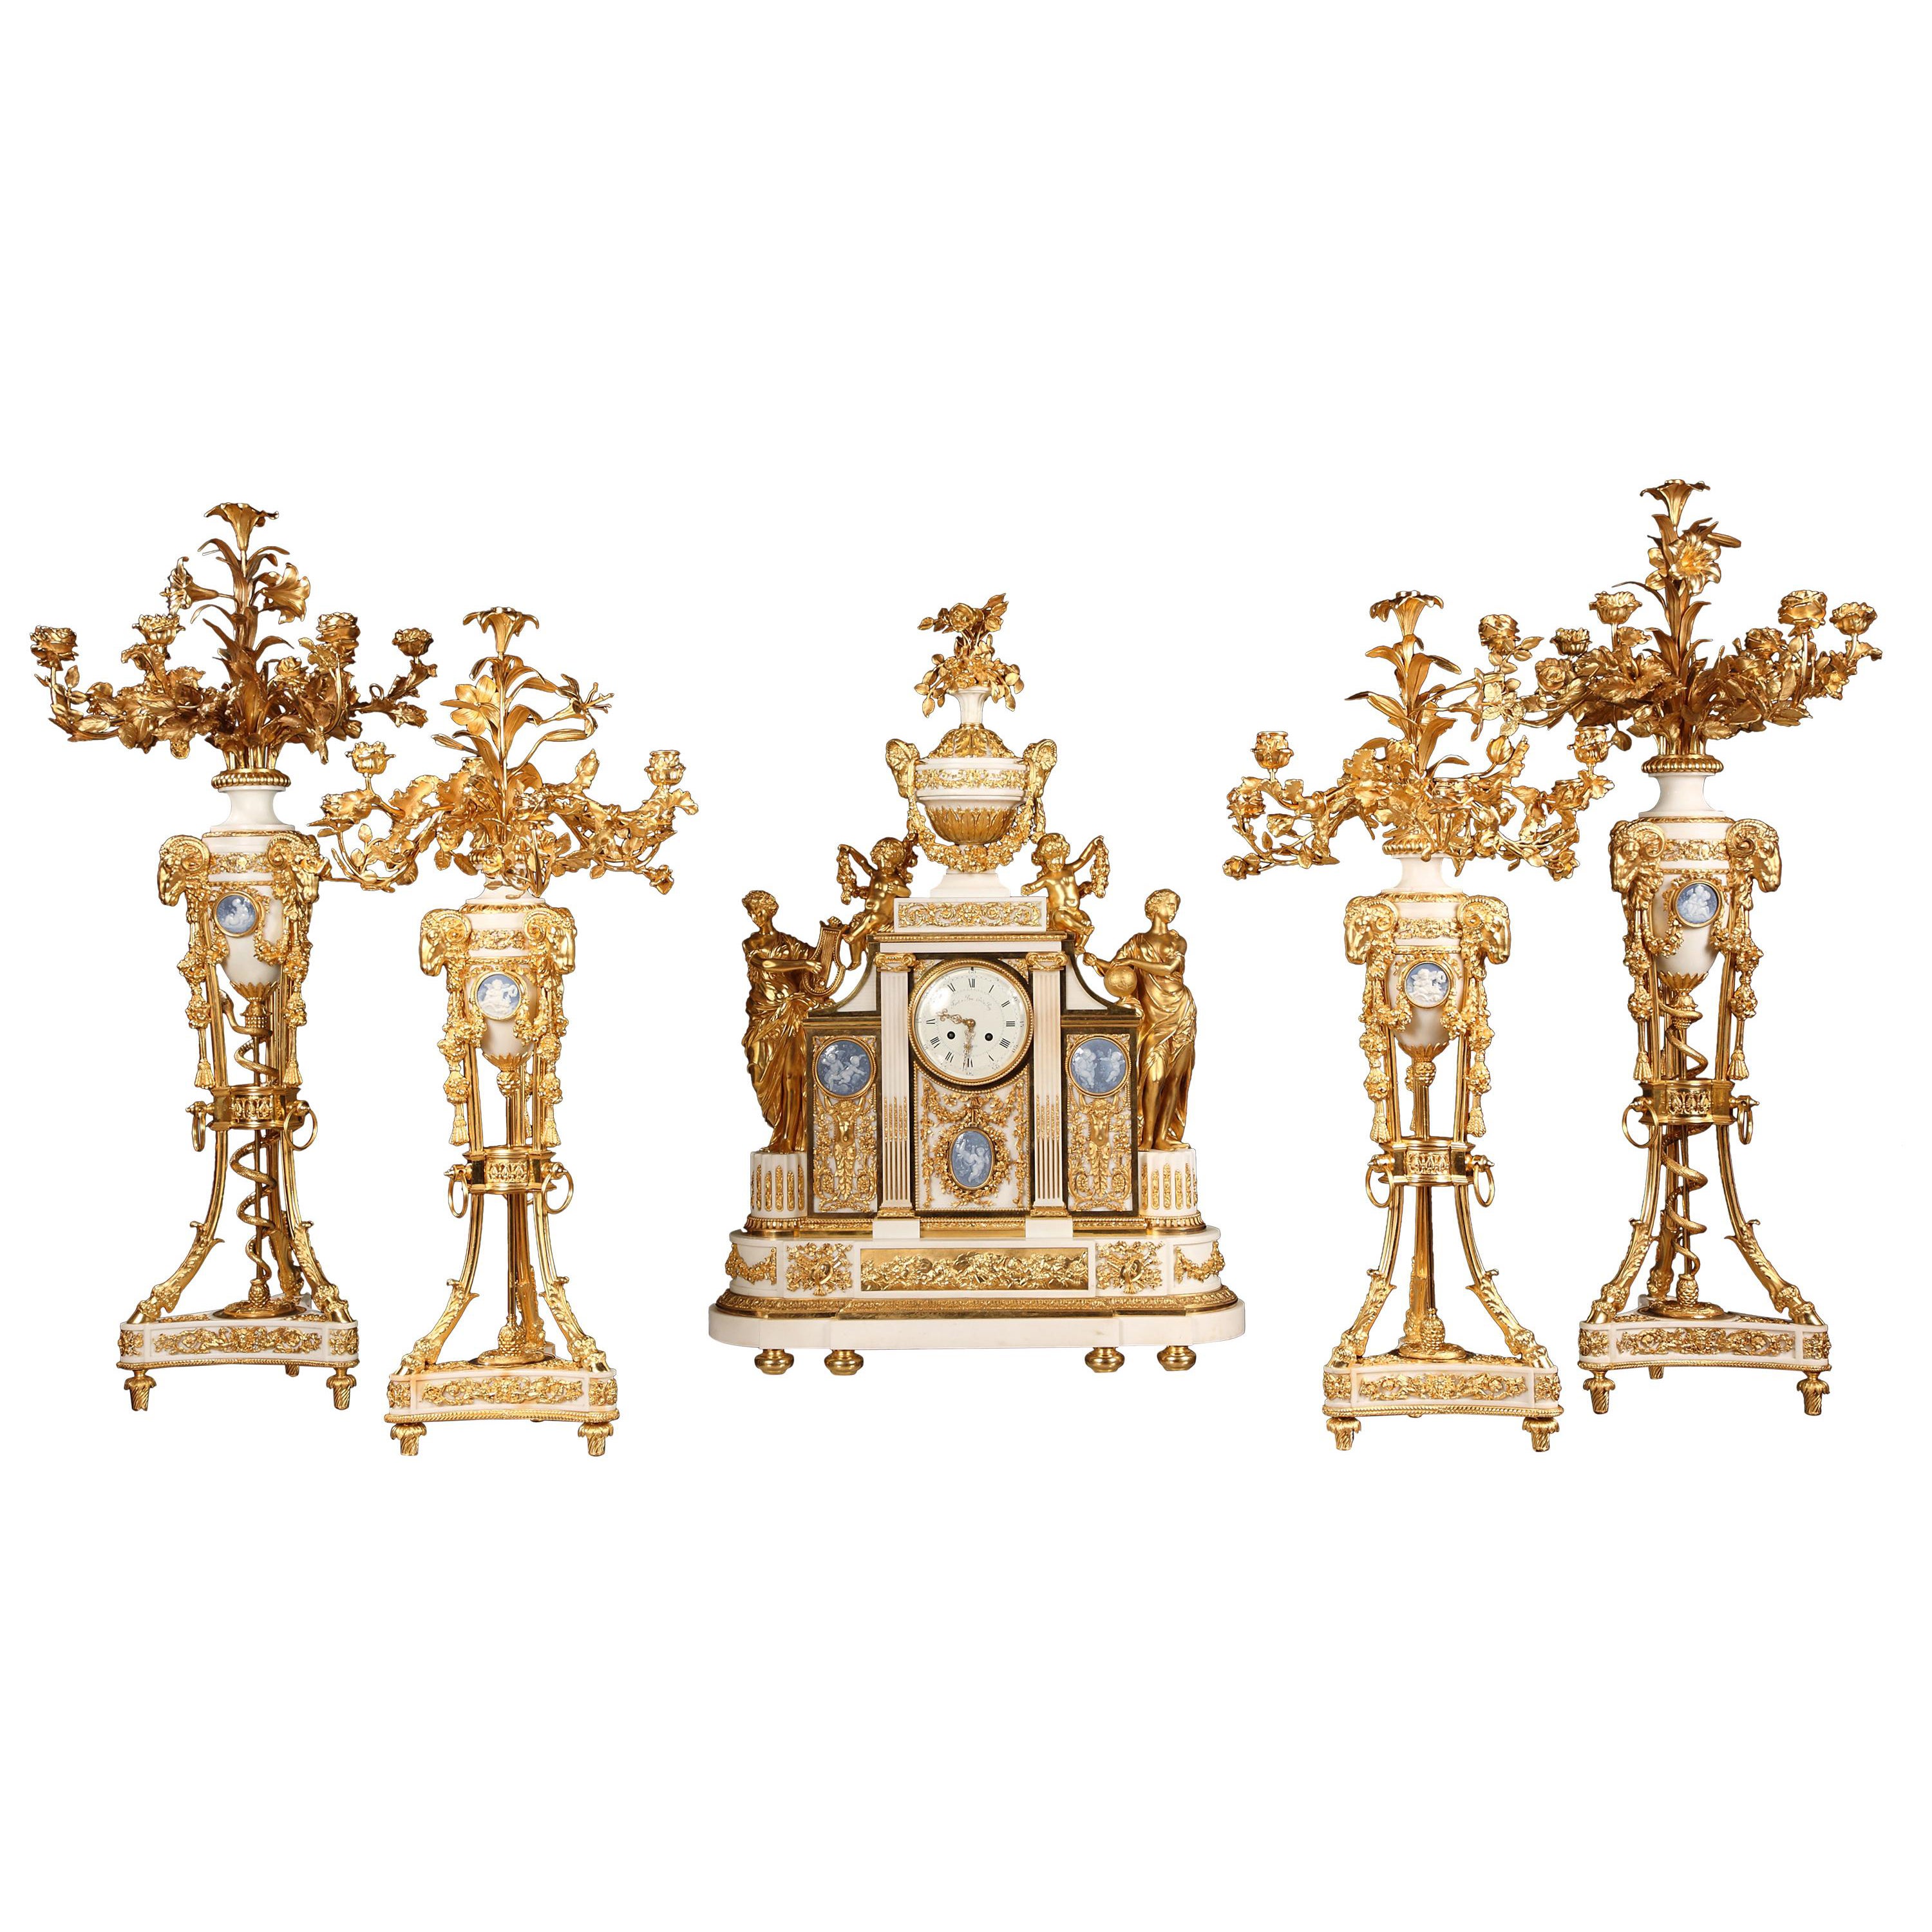 Important Five Pieces Marble and Gilded Bronze Clock Set, France, Circa 1860